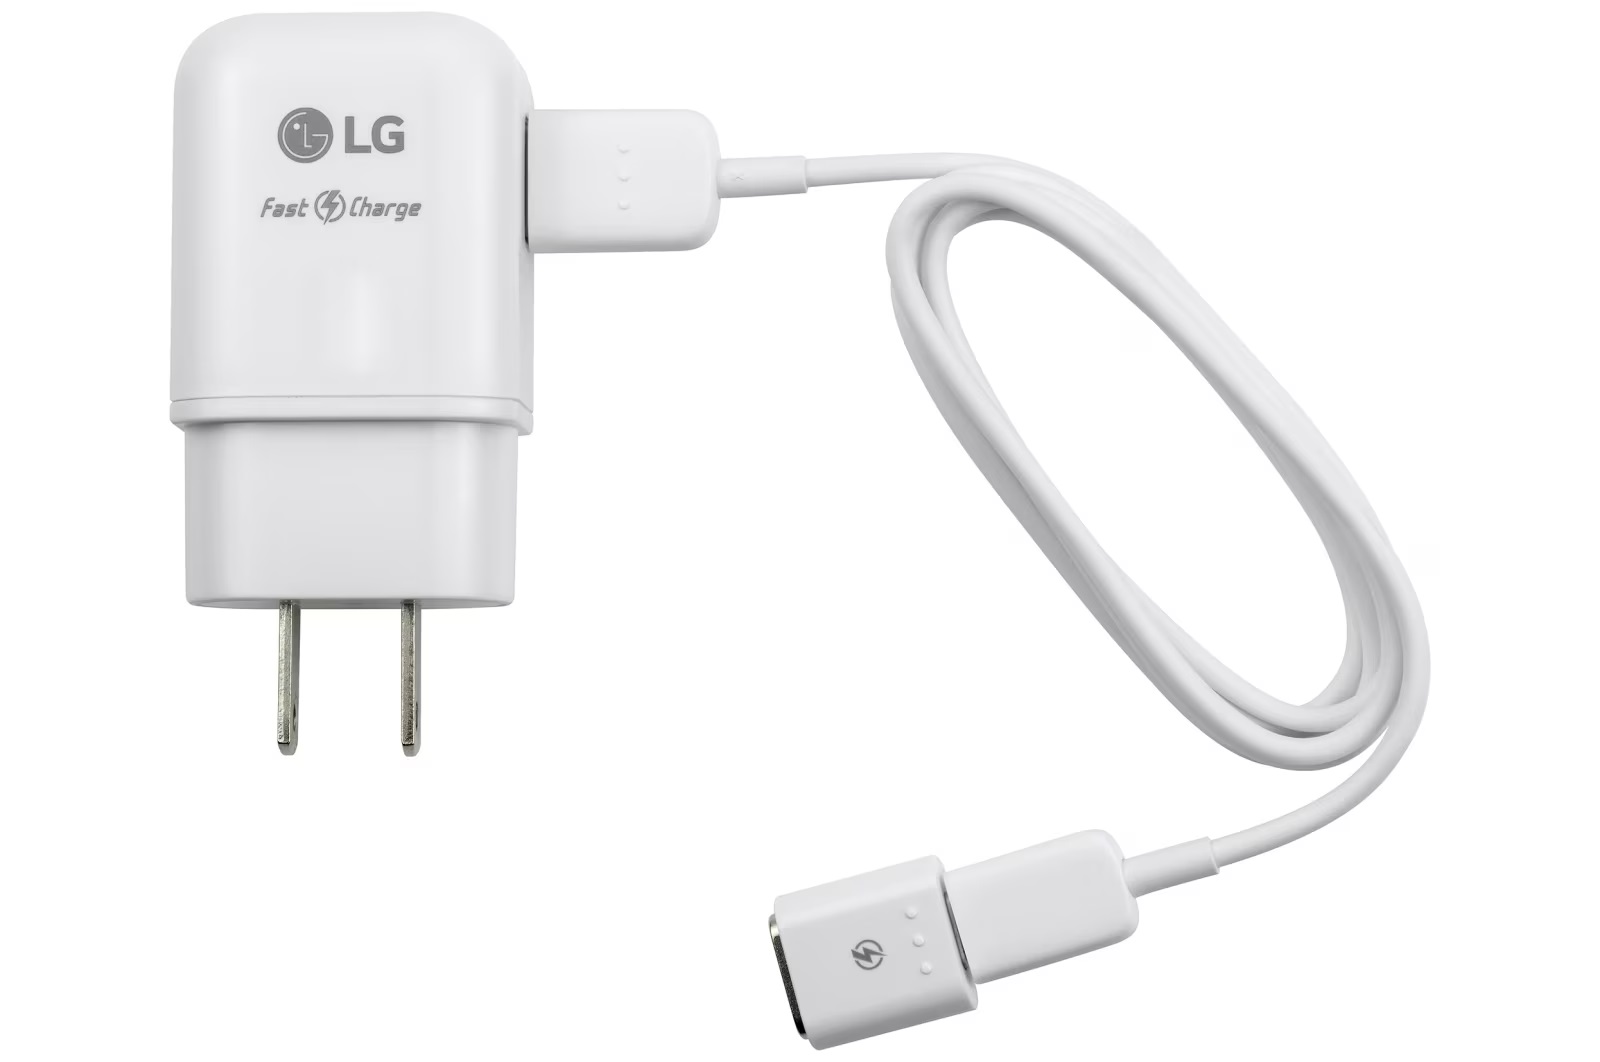 where-can-i-buy-an-lg-phone-charger